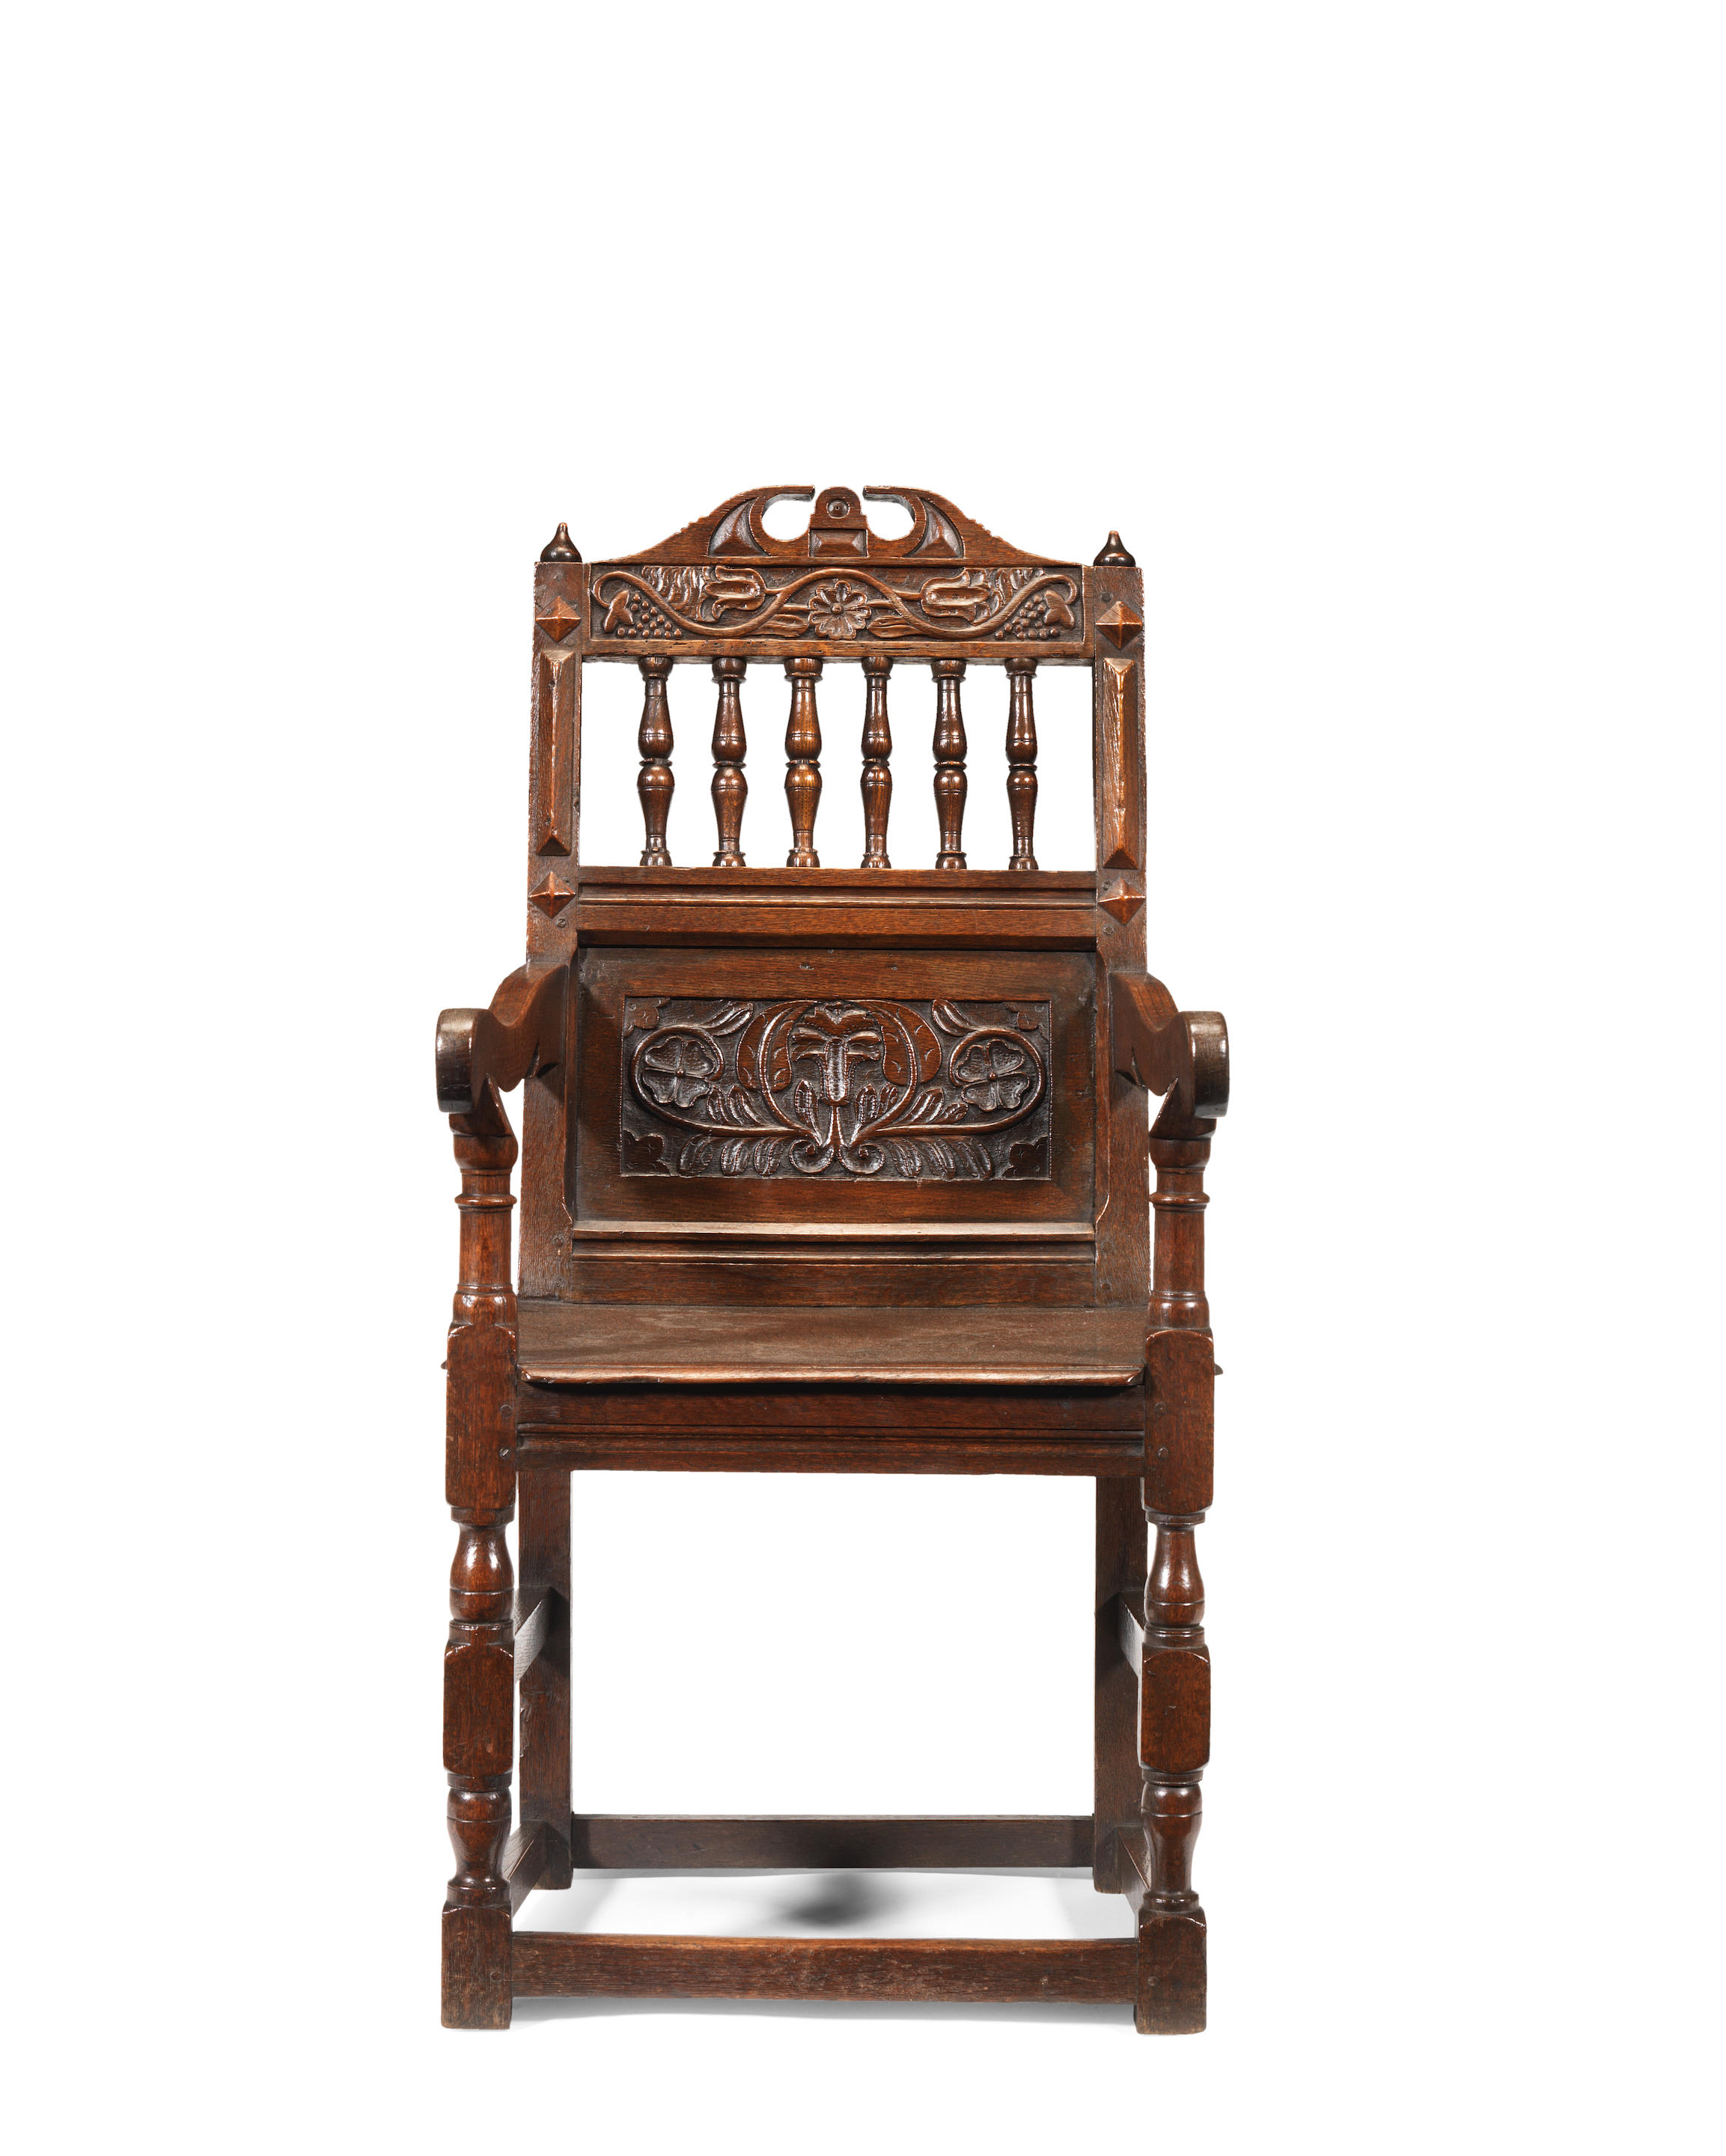 A Charles II joined oak panel and open-back armchair, Cheshire, circa 1670